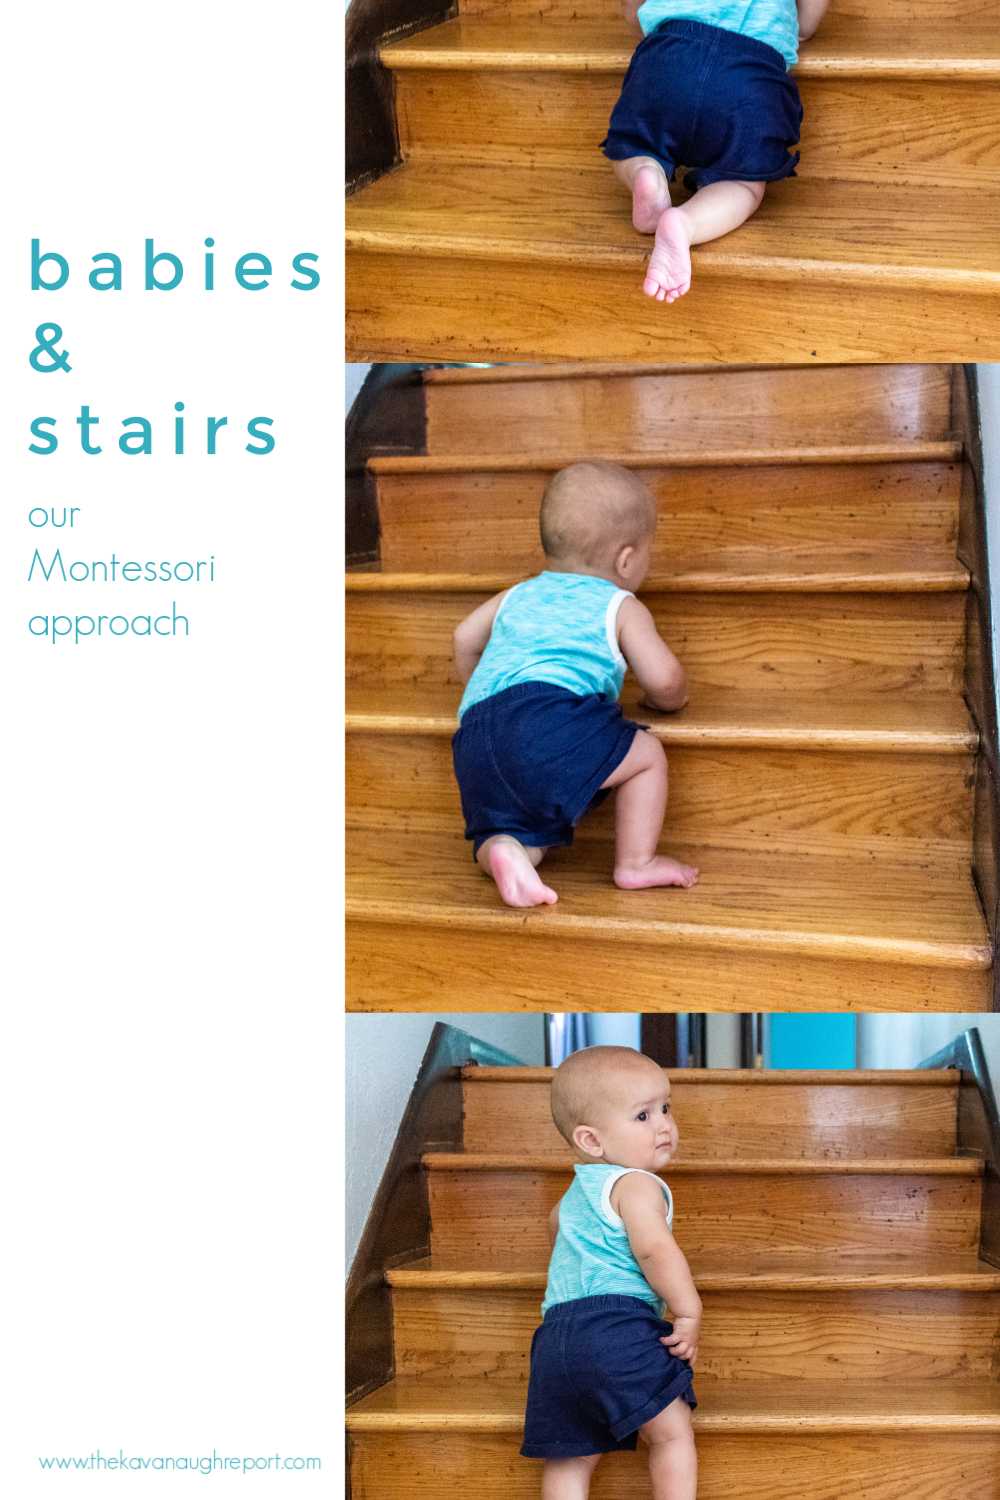 Parenting advice for Montessori babies and stairs. Here's some tips on how we approach stairs and keep everyone safe.